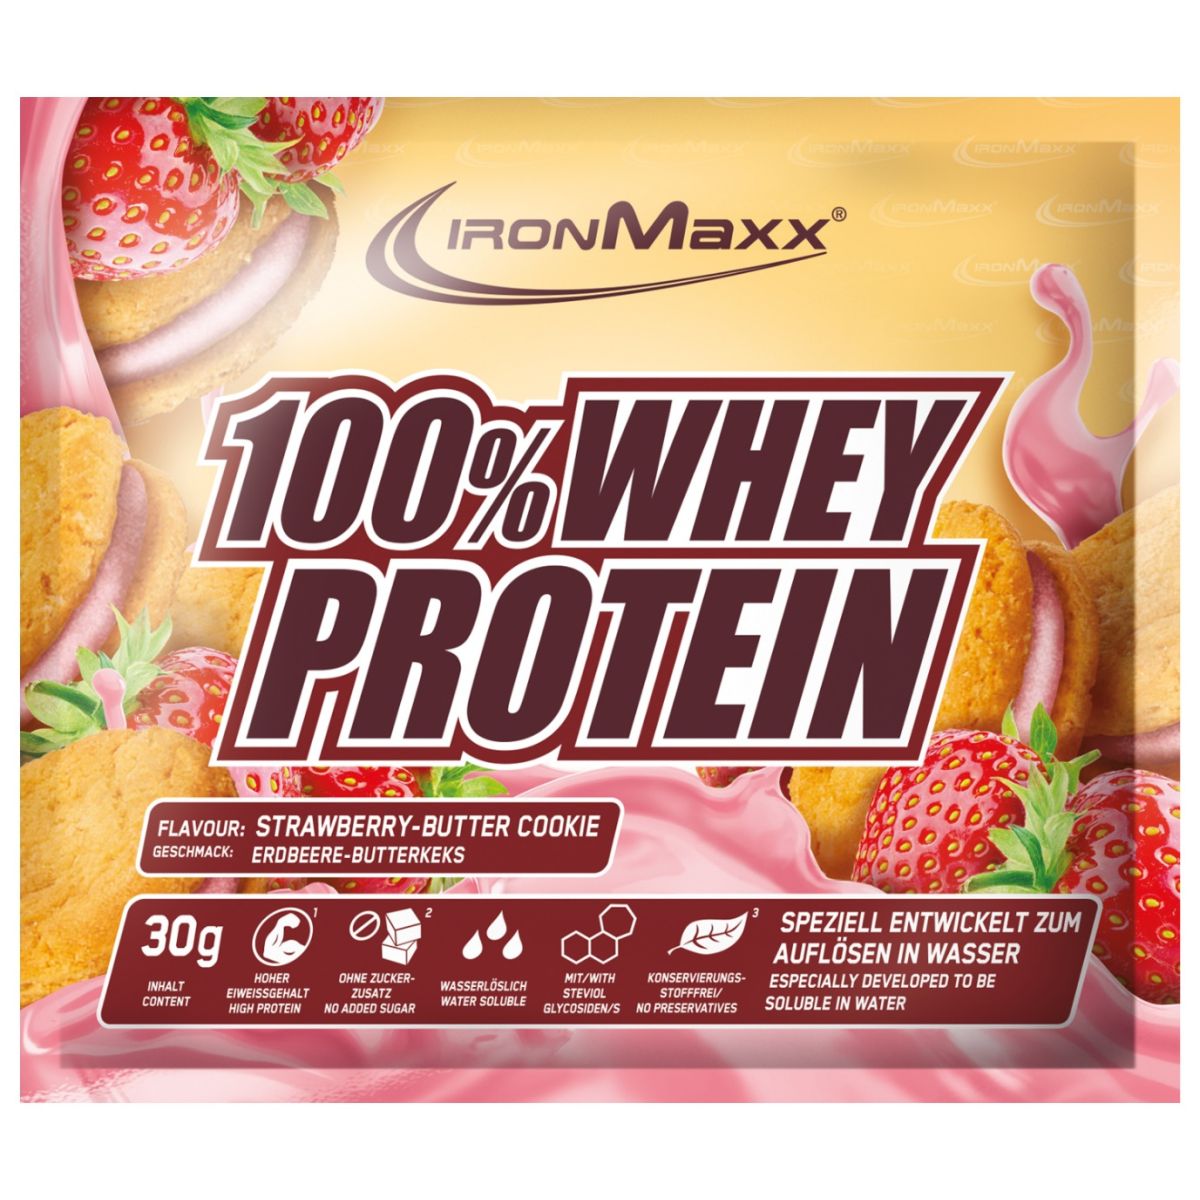 100% Whey Protein - 30g Probe - Strawberry Butter Cookie